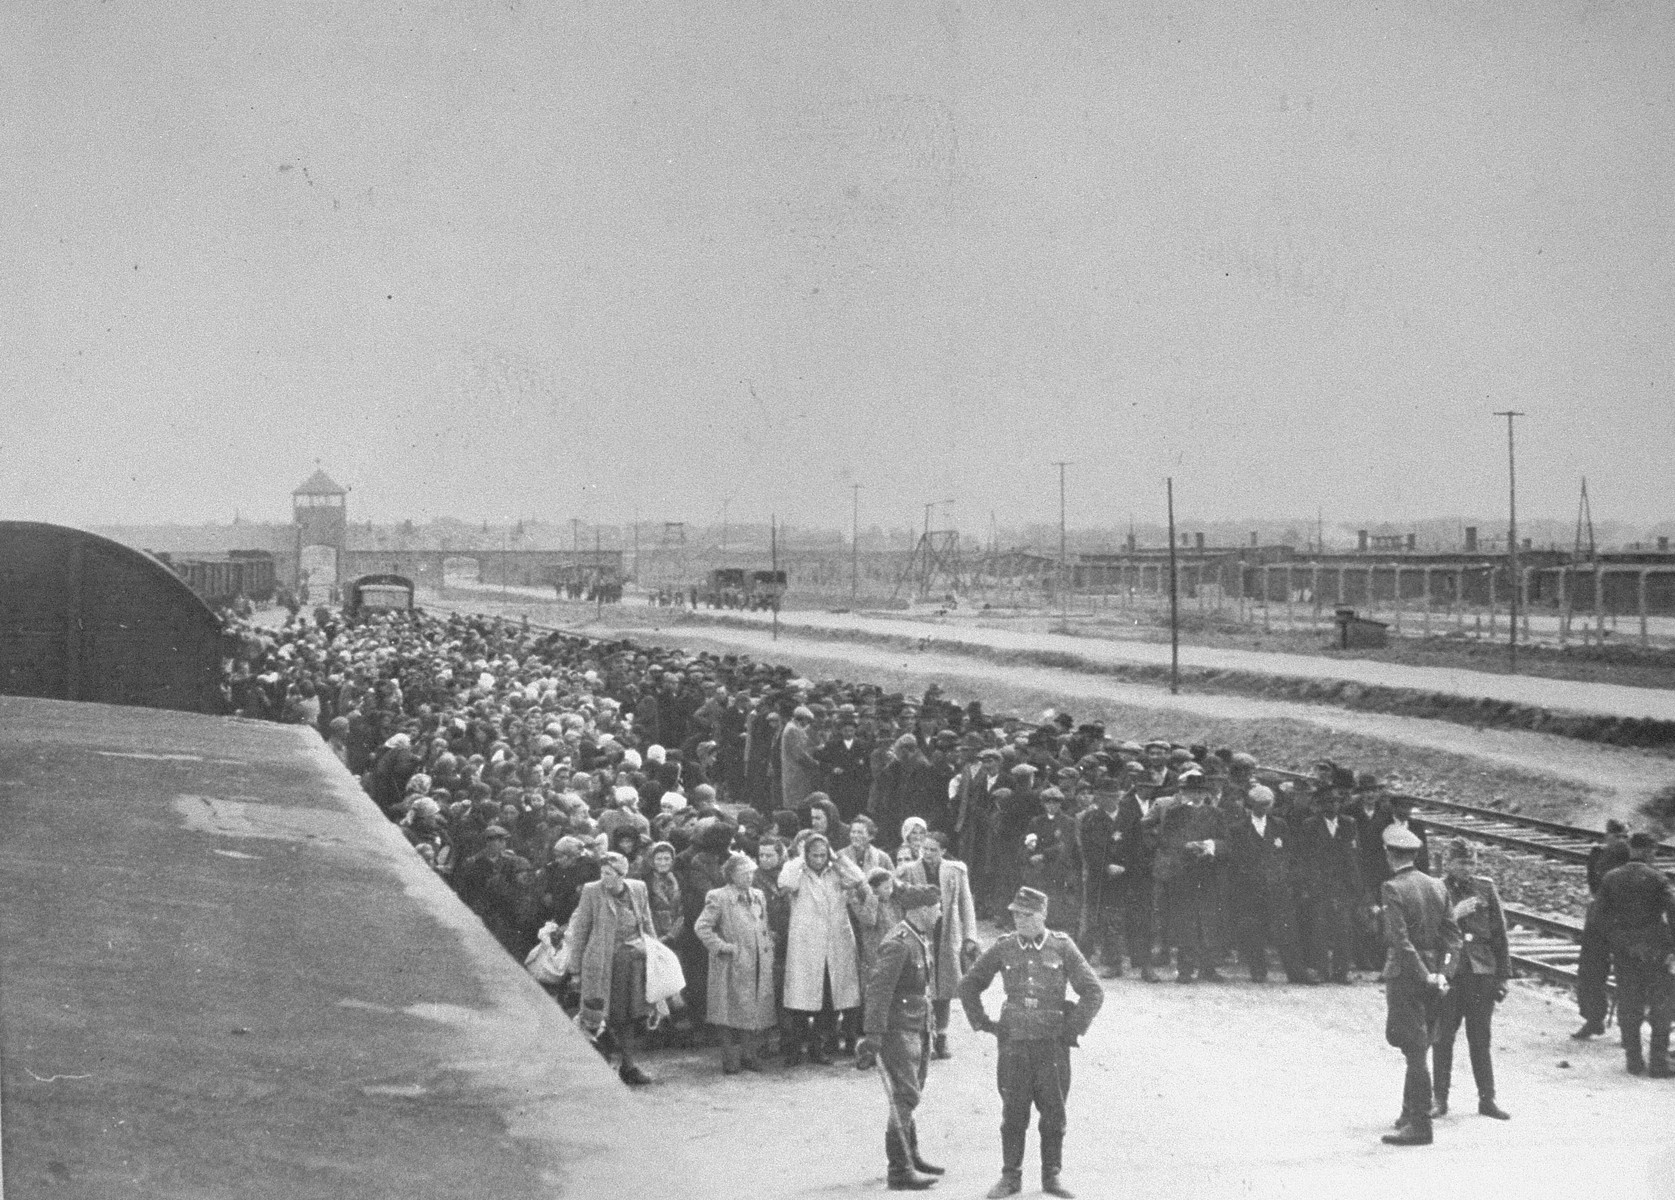 View from atop the train of Jews lined up for selection on the ramp at Auschwitz-Birkenau.

Rozi (nee Mueller) Bittman is standing in the front row, second from the left.  The SS officer in the center wearing a visor cap is Walter Schmidetzki.